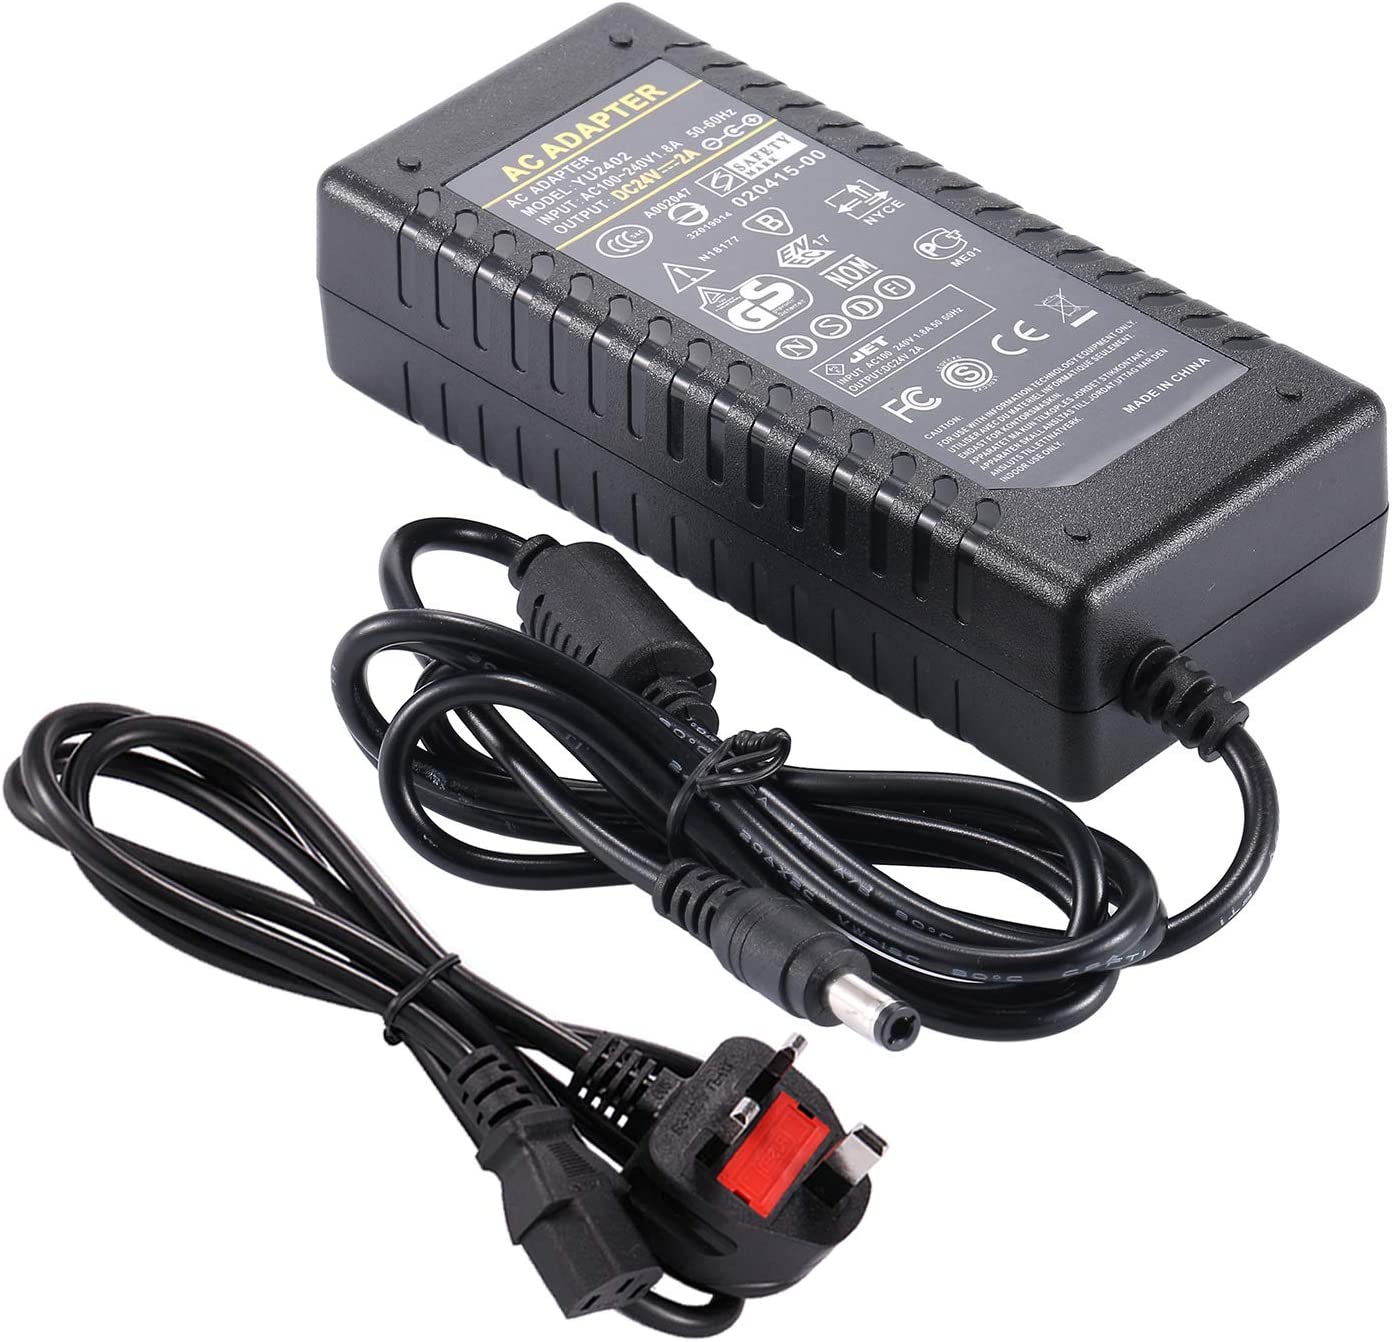 24V 2A Power Supply, AC DC 24V 48W Switching Power Adapter Supply with UK Power Cord